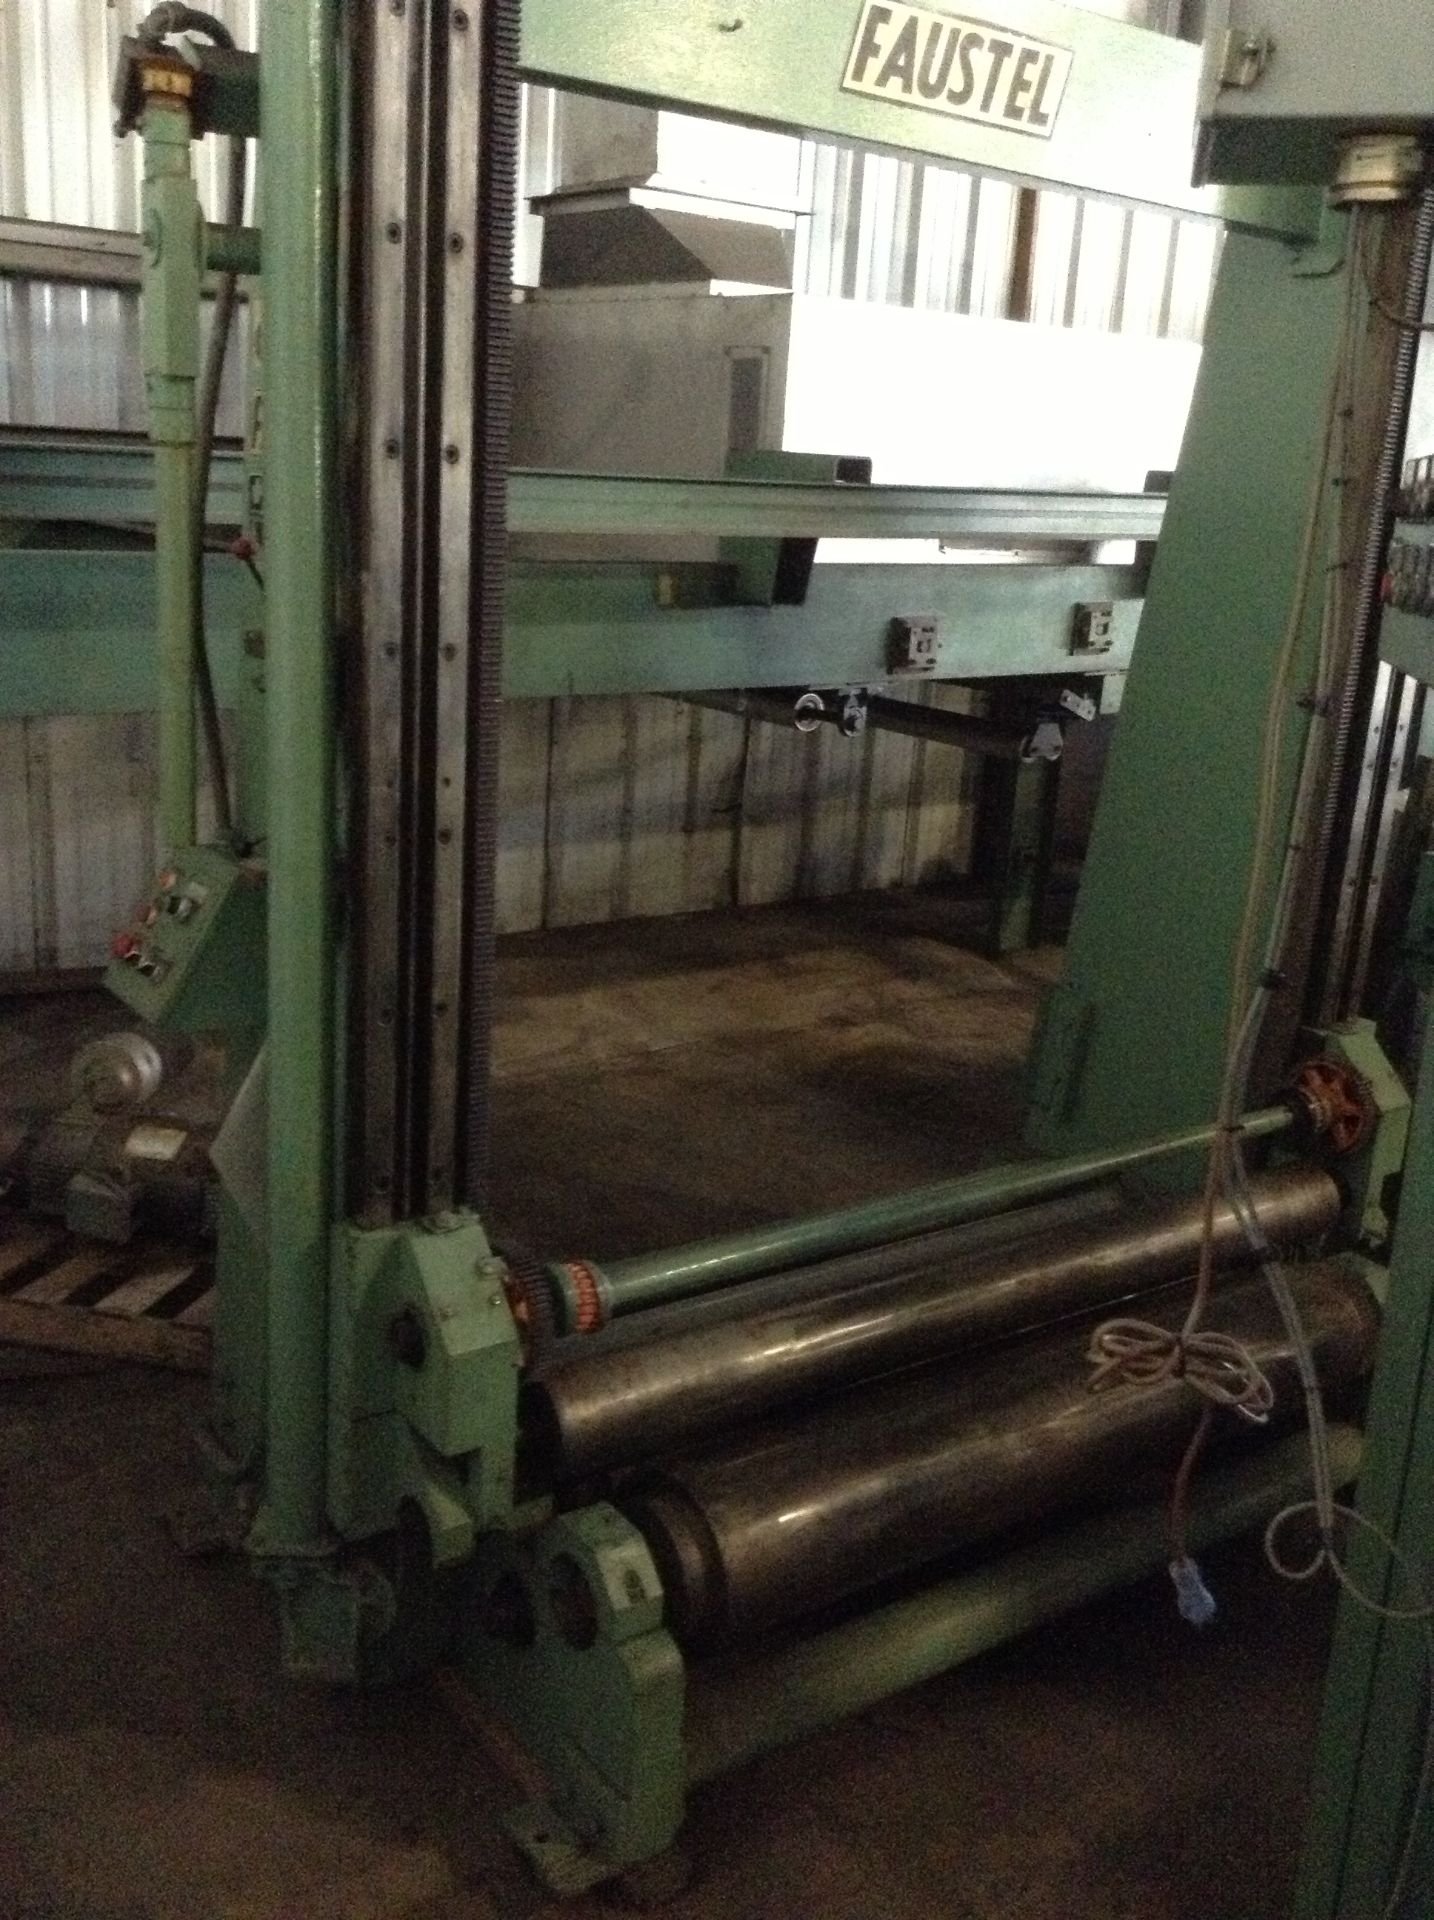 56" Faustel 2-drum surface rewind single shaft rewinder. Was inline with a laminator operating at - Image 2 of 17